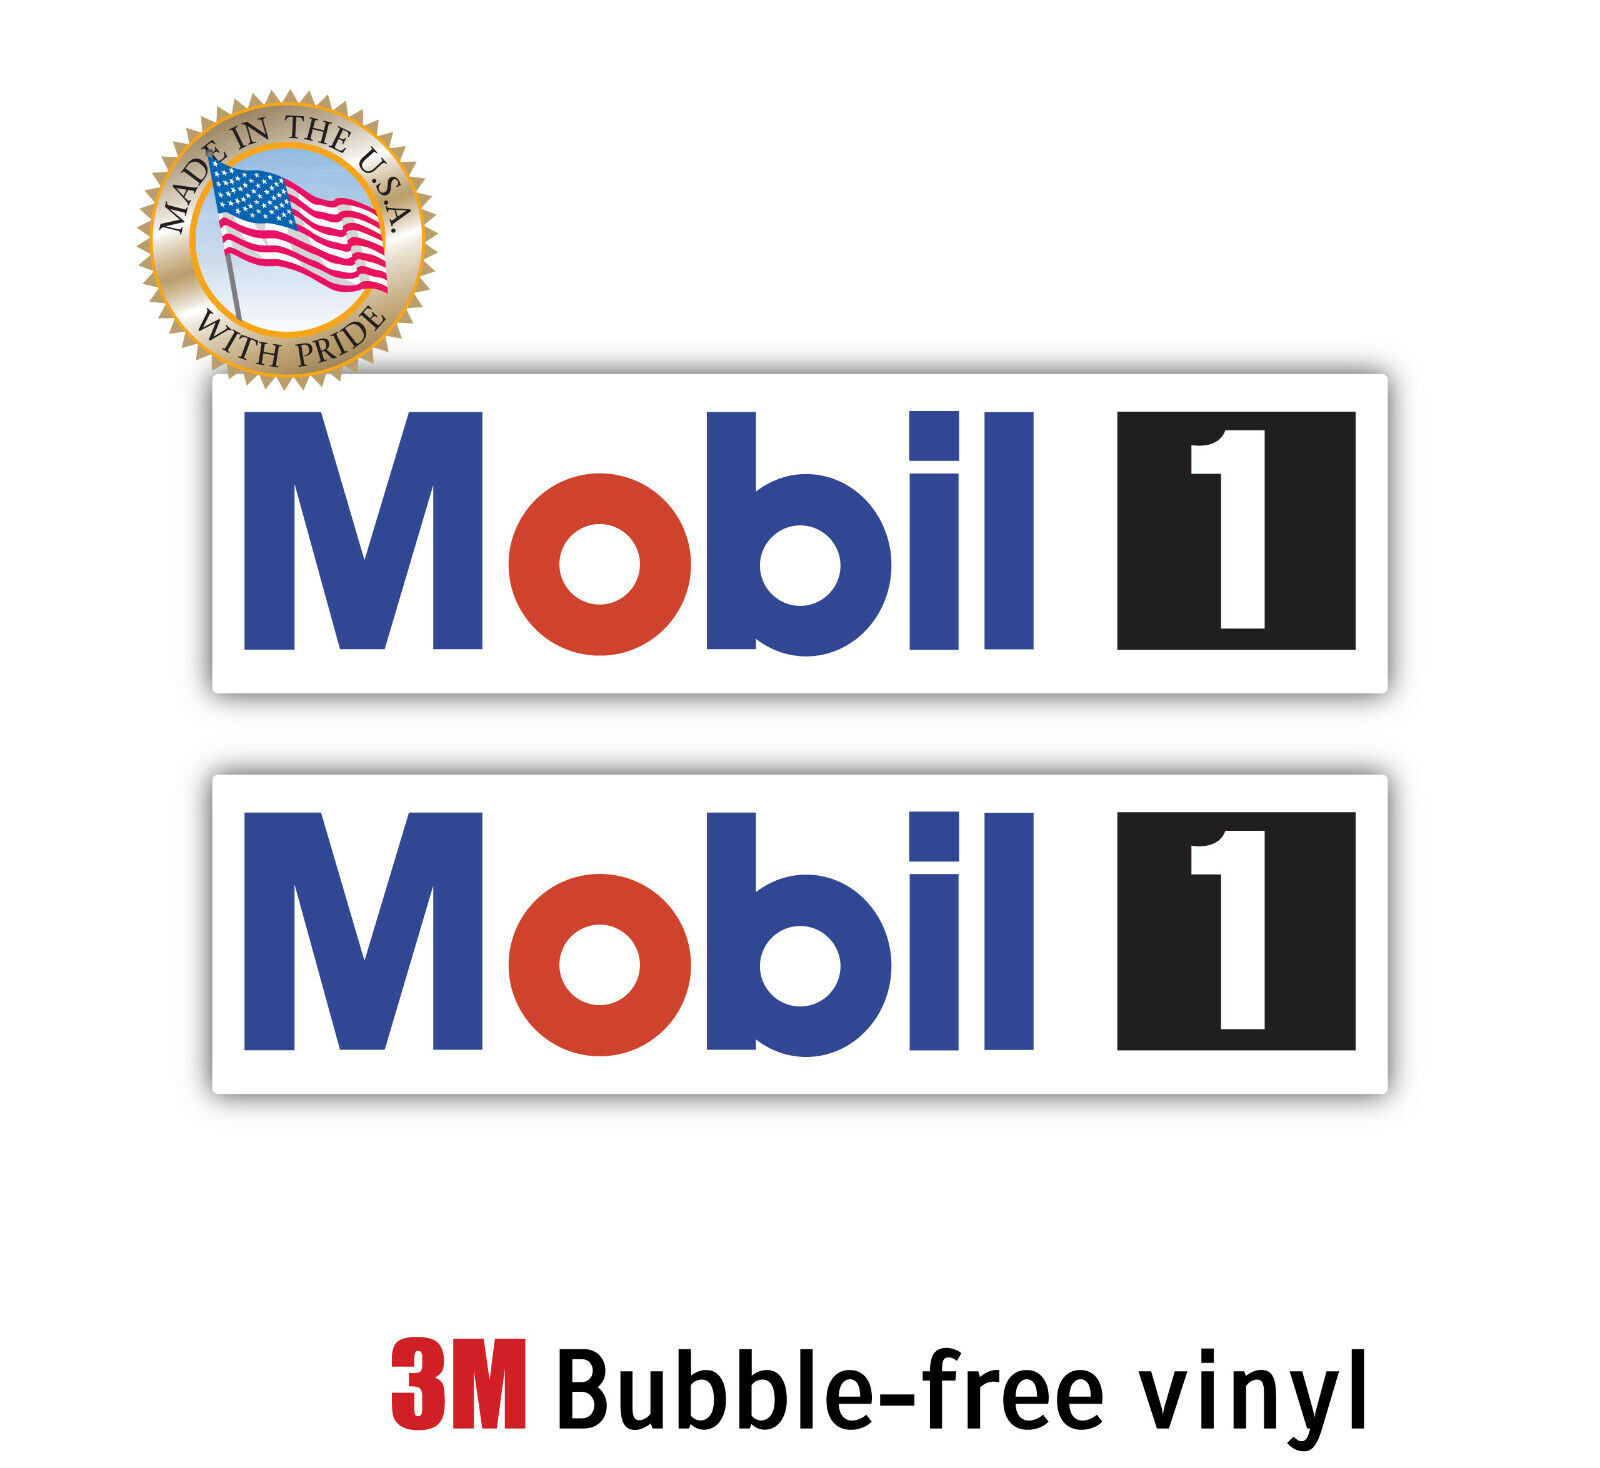 2X MOBIL 1 RACING OIL GAS RACING DECAL 3M STICKER MADE IN USA WINDOW CAR LAPTOP 